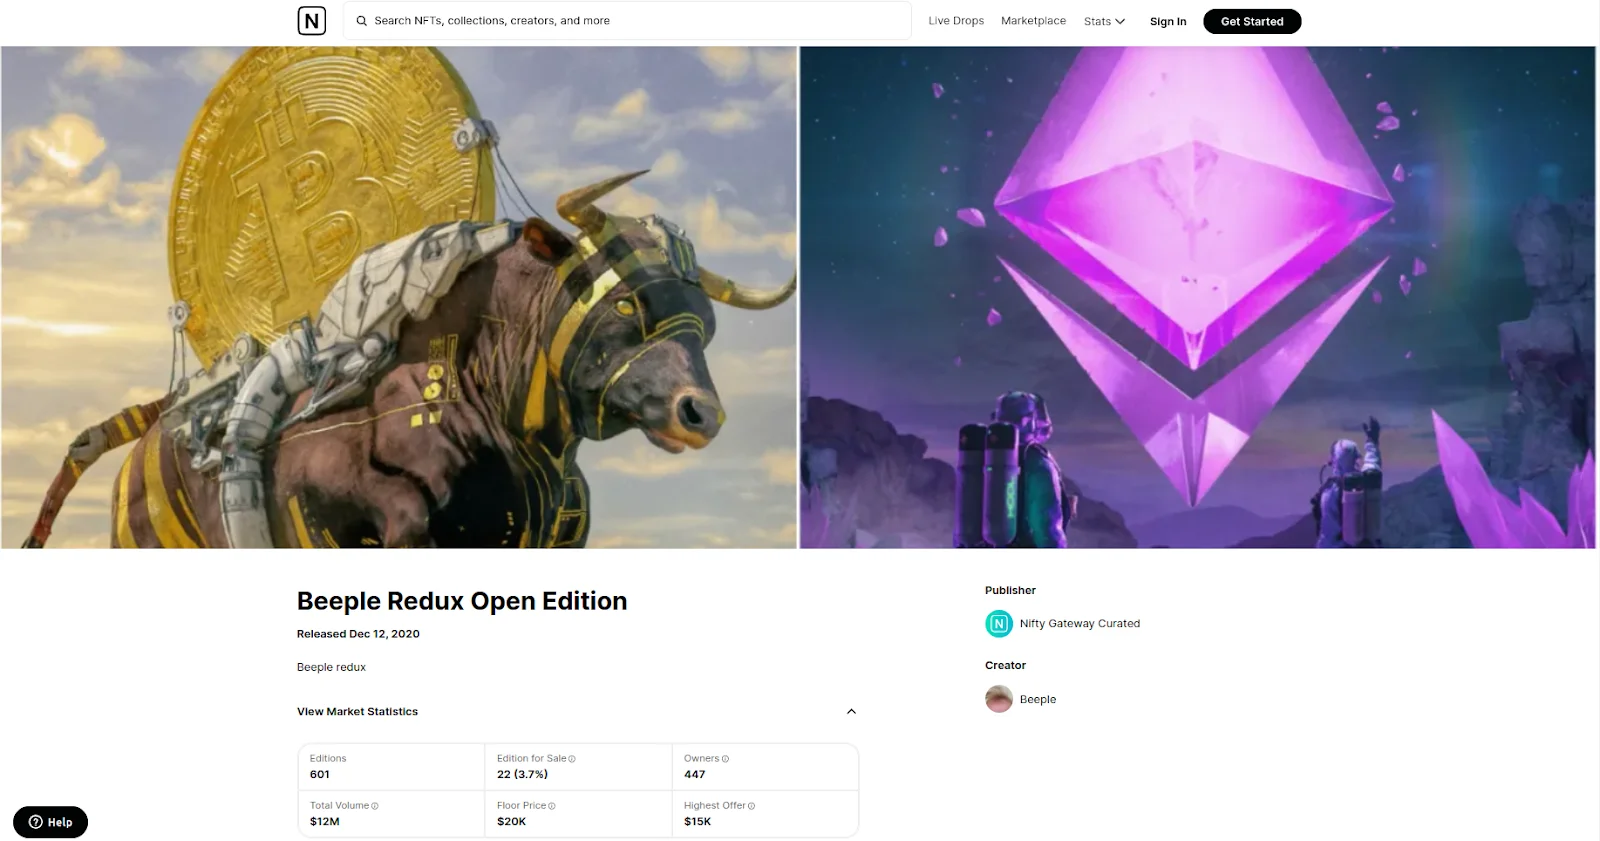 Beeple Redux Open Edition for sale on NiftyGateway